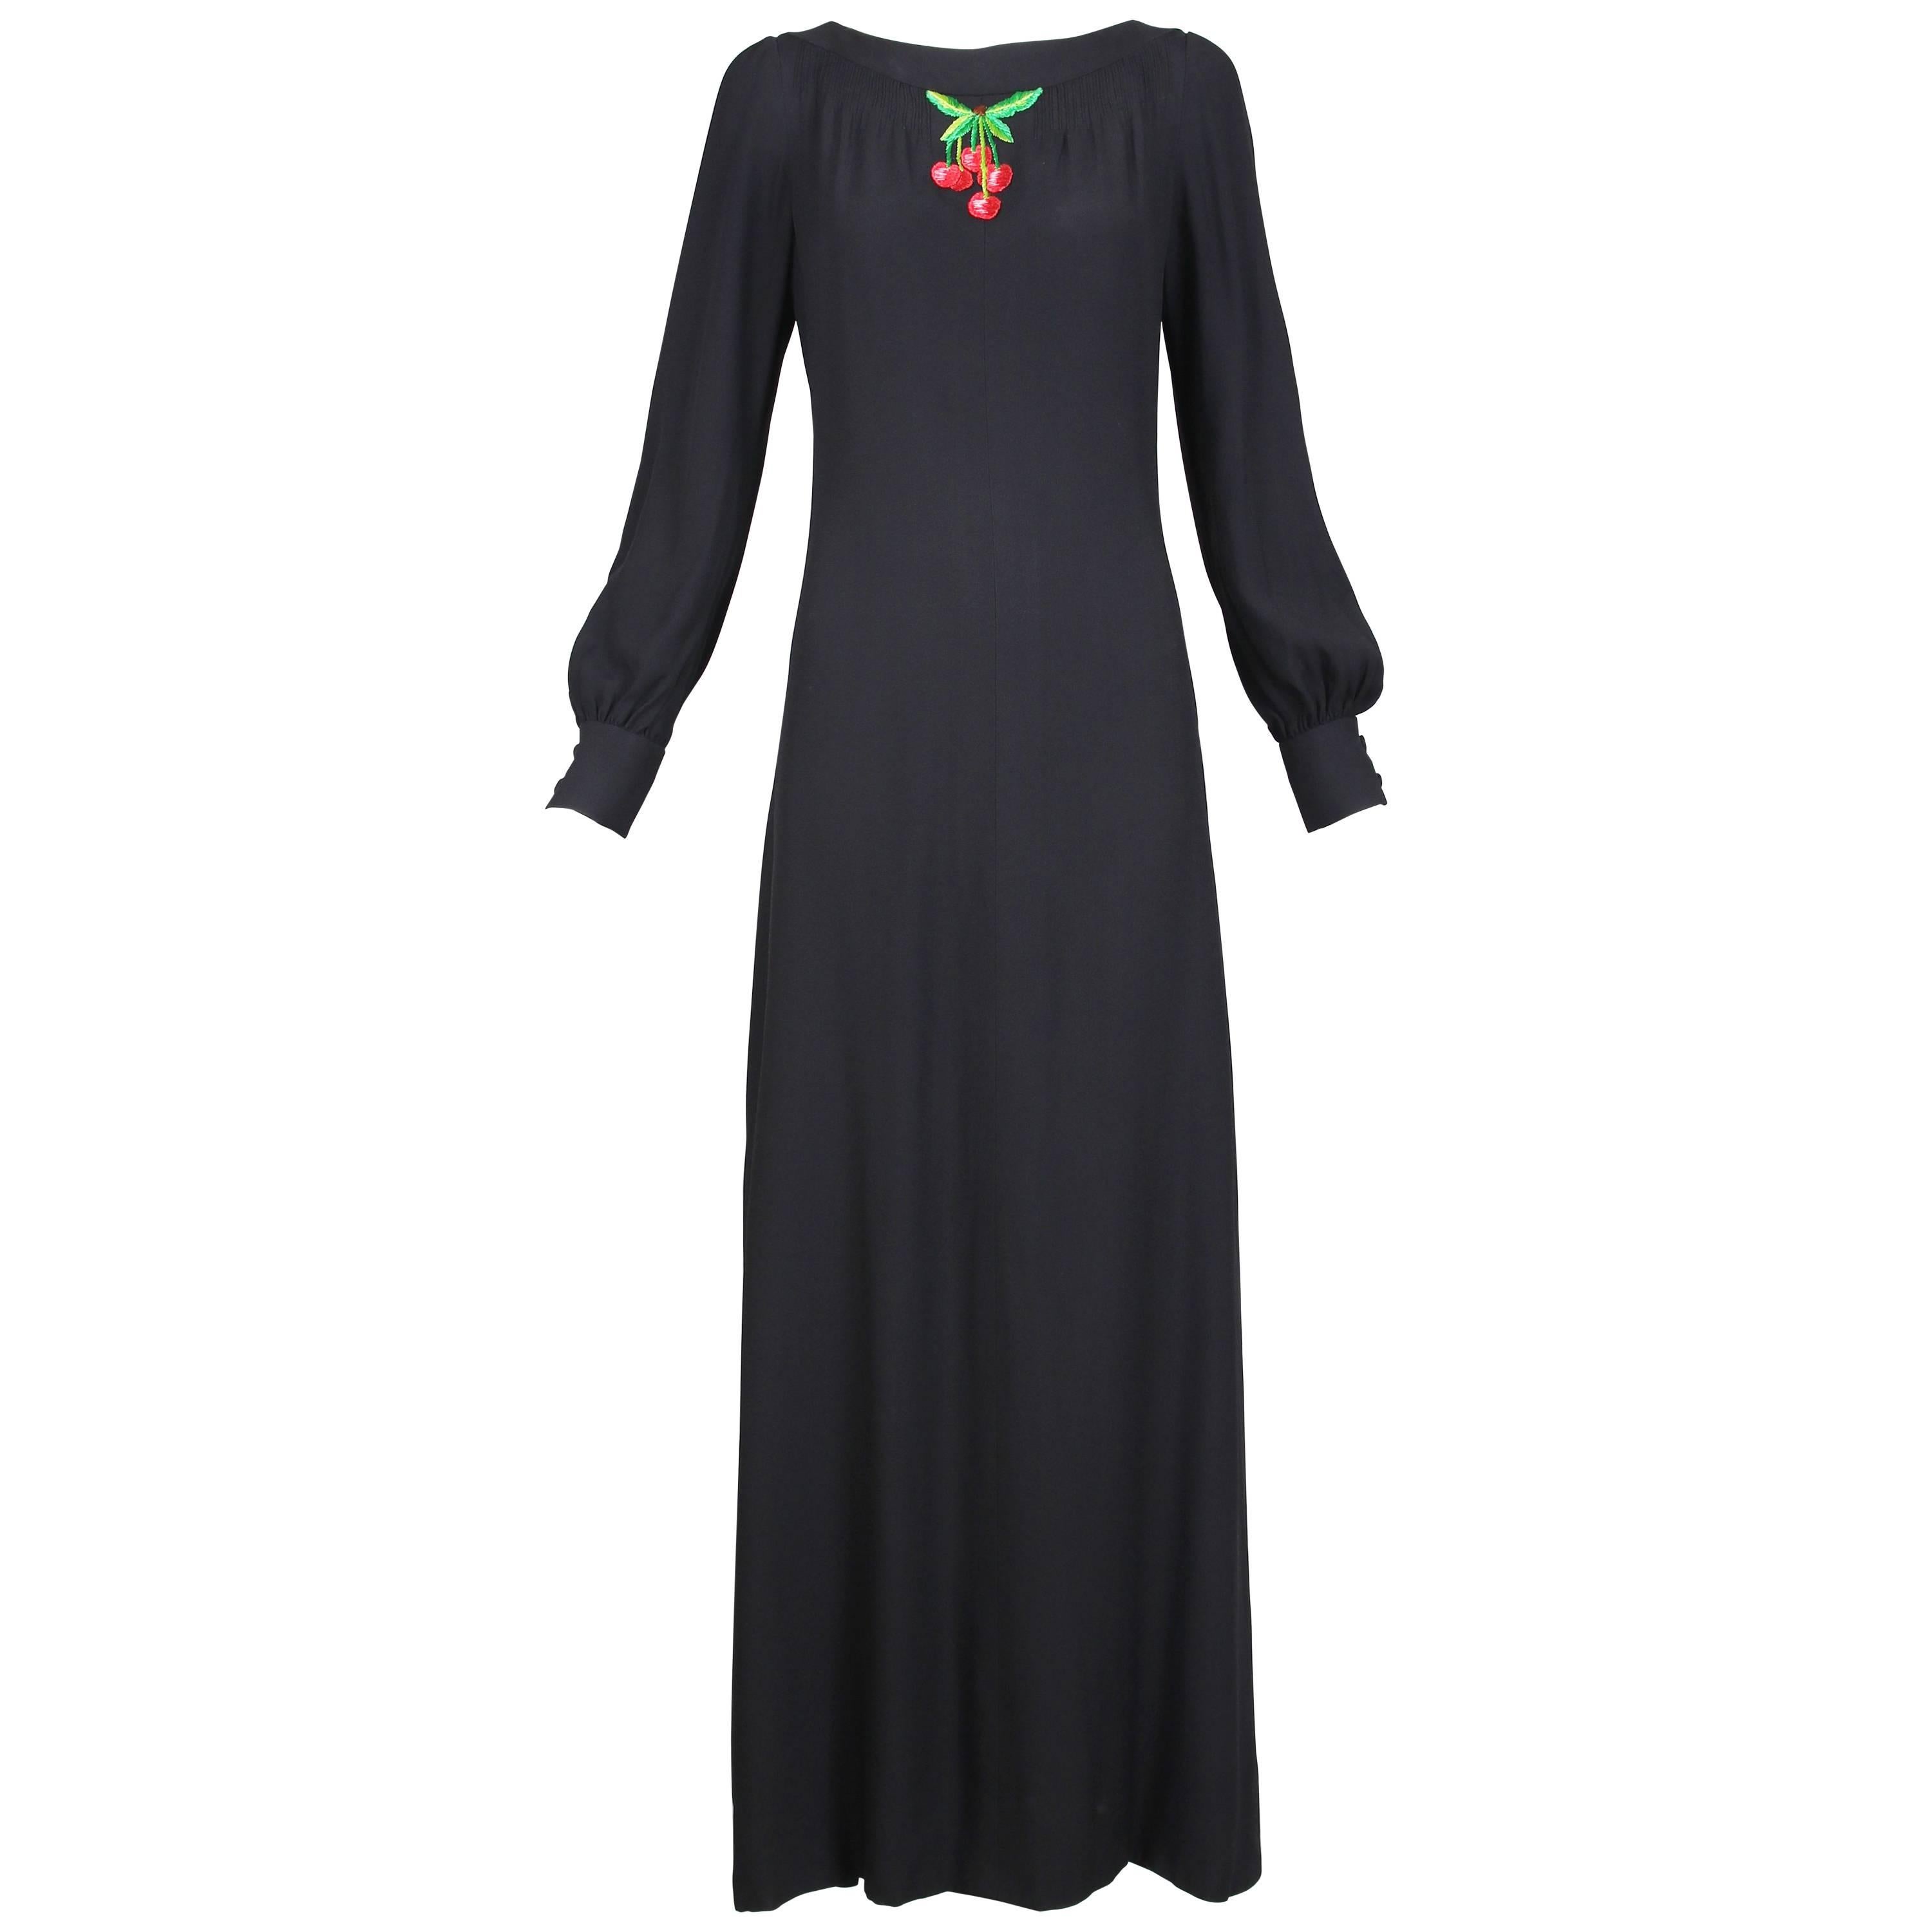 1970s Valentino Black Maxi Dress With Pin Tucks and Embroidered Cherry Applique